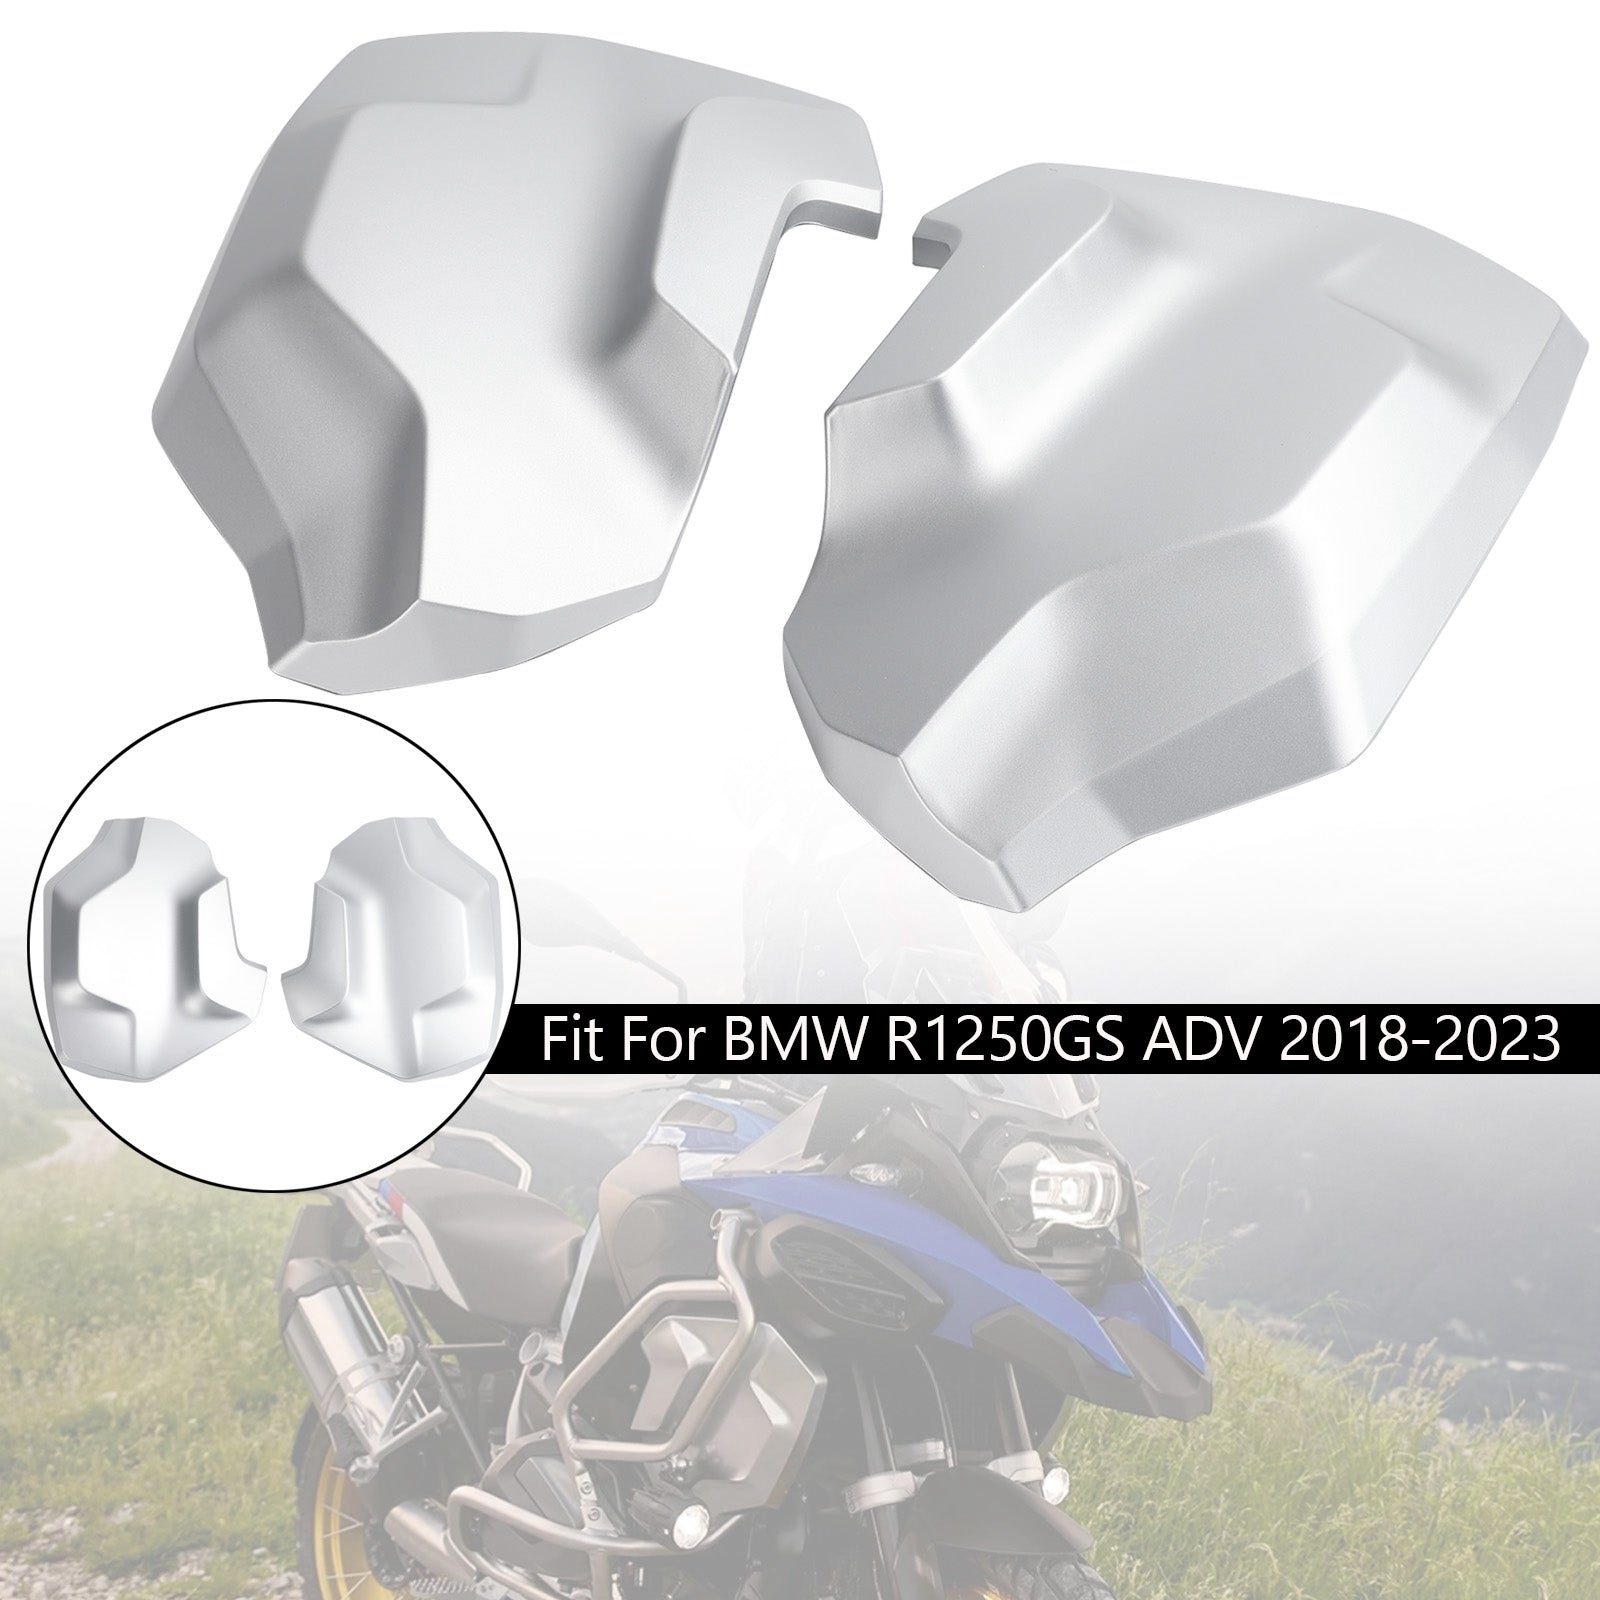 2018-2023 BMW R1250GS ADV Side Frame Fairing Cowl Guards Radiator Cover